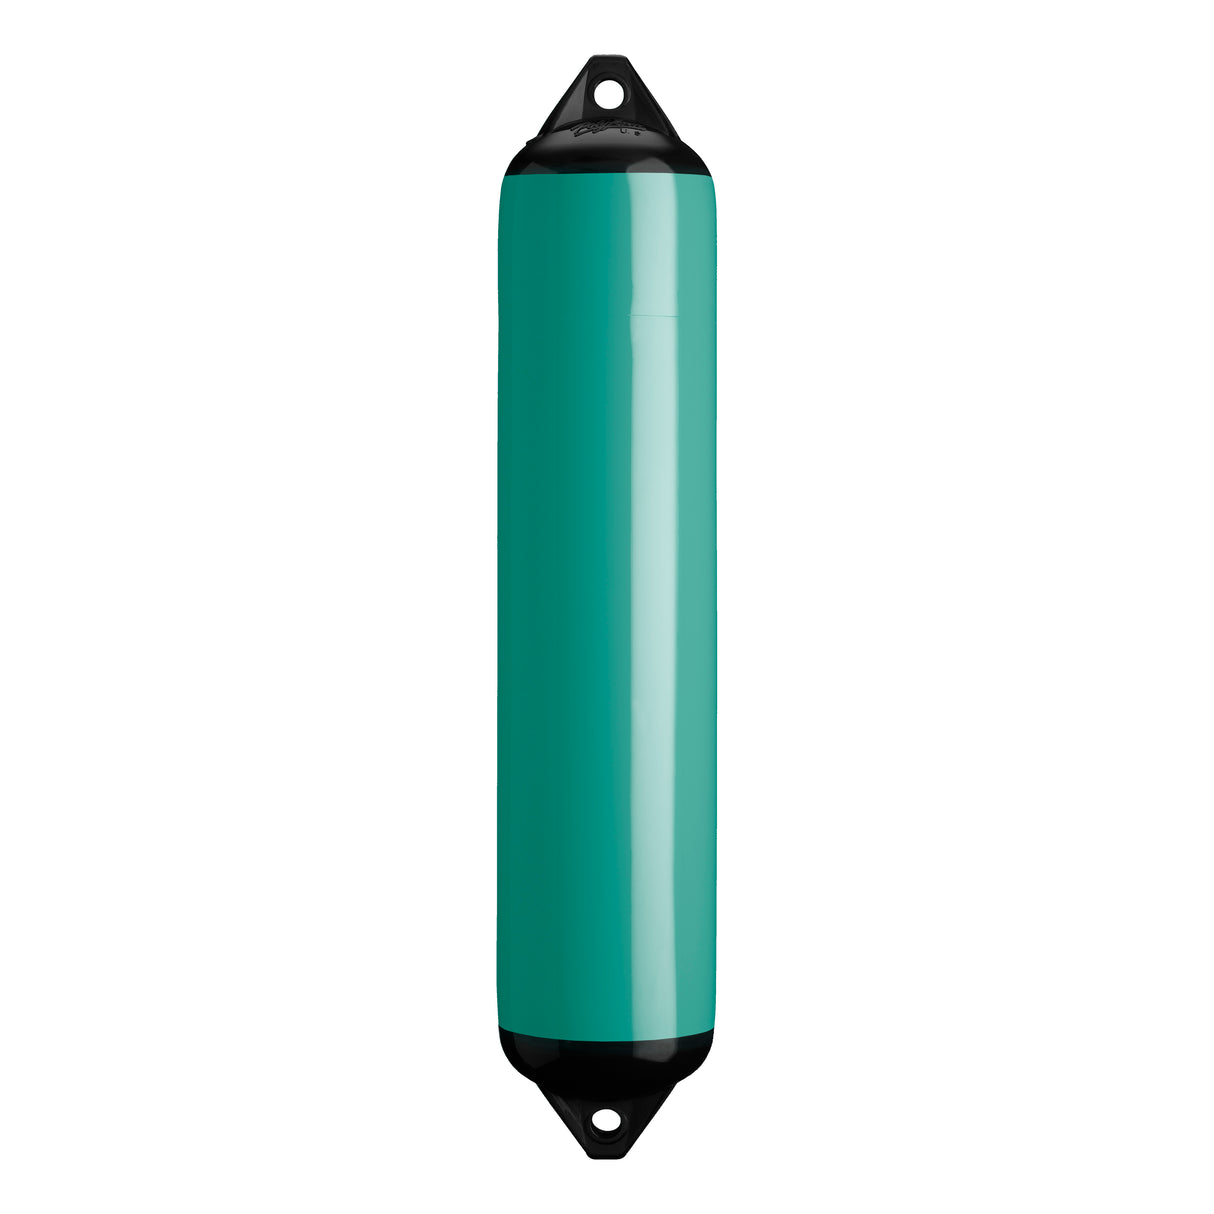 Teal boat fender with Black-Top, Polyform F-4